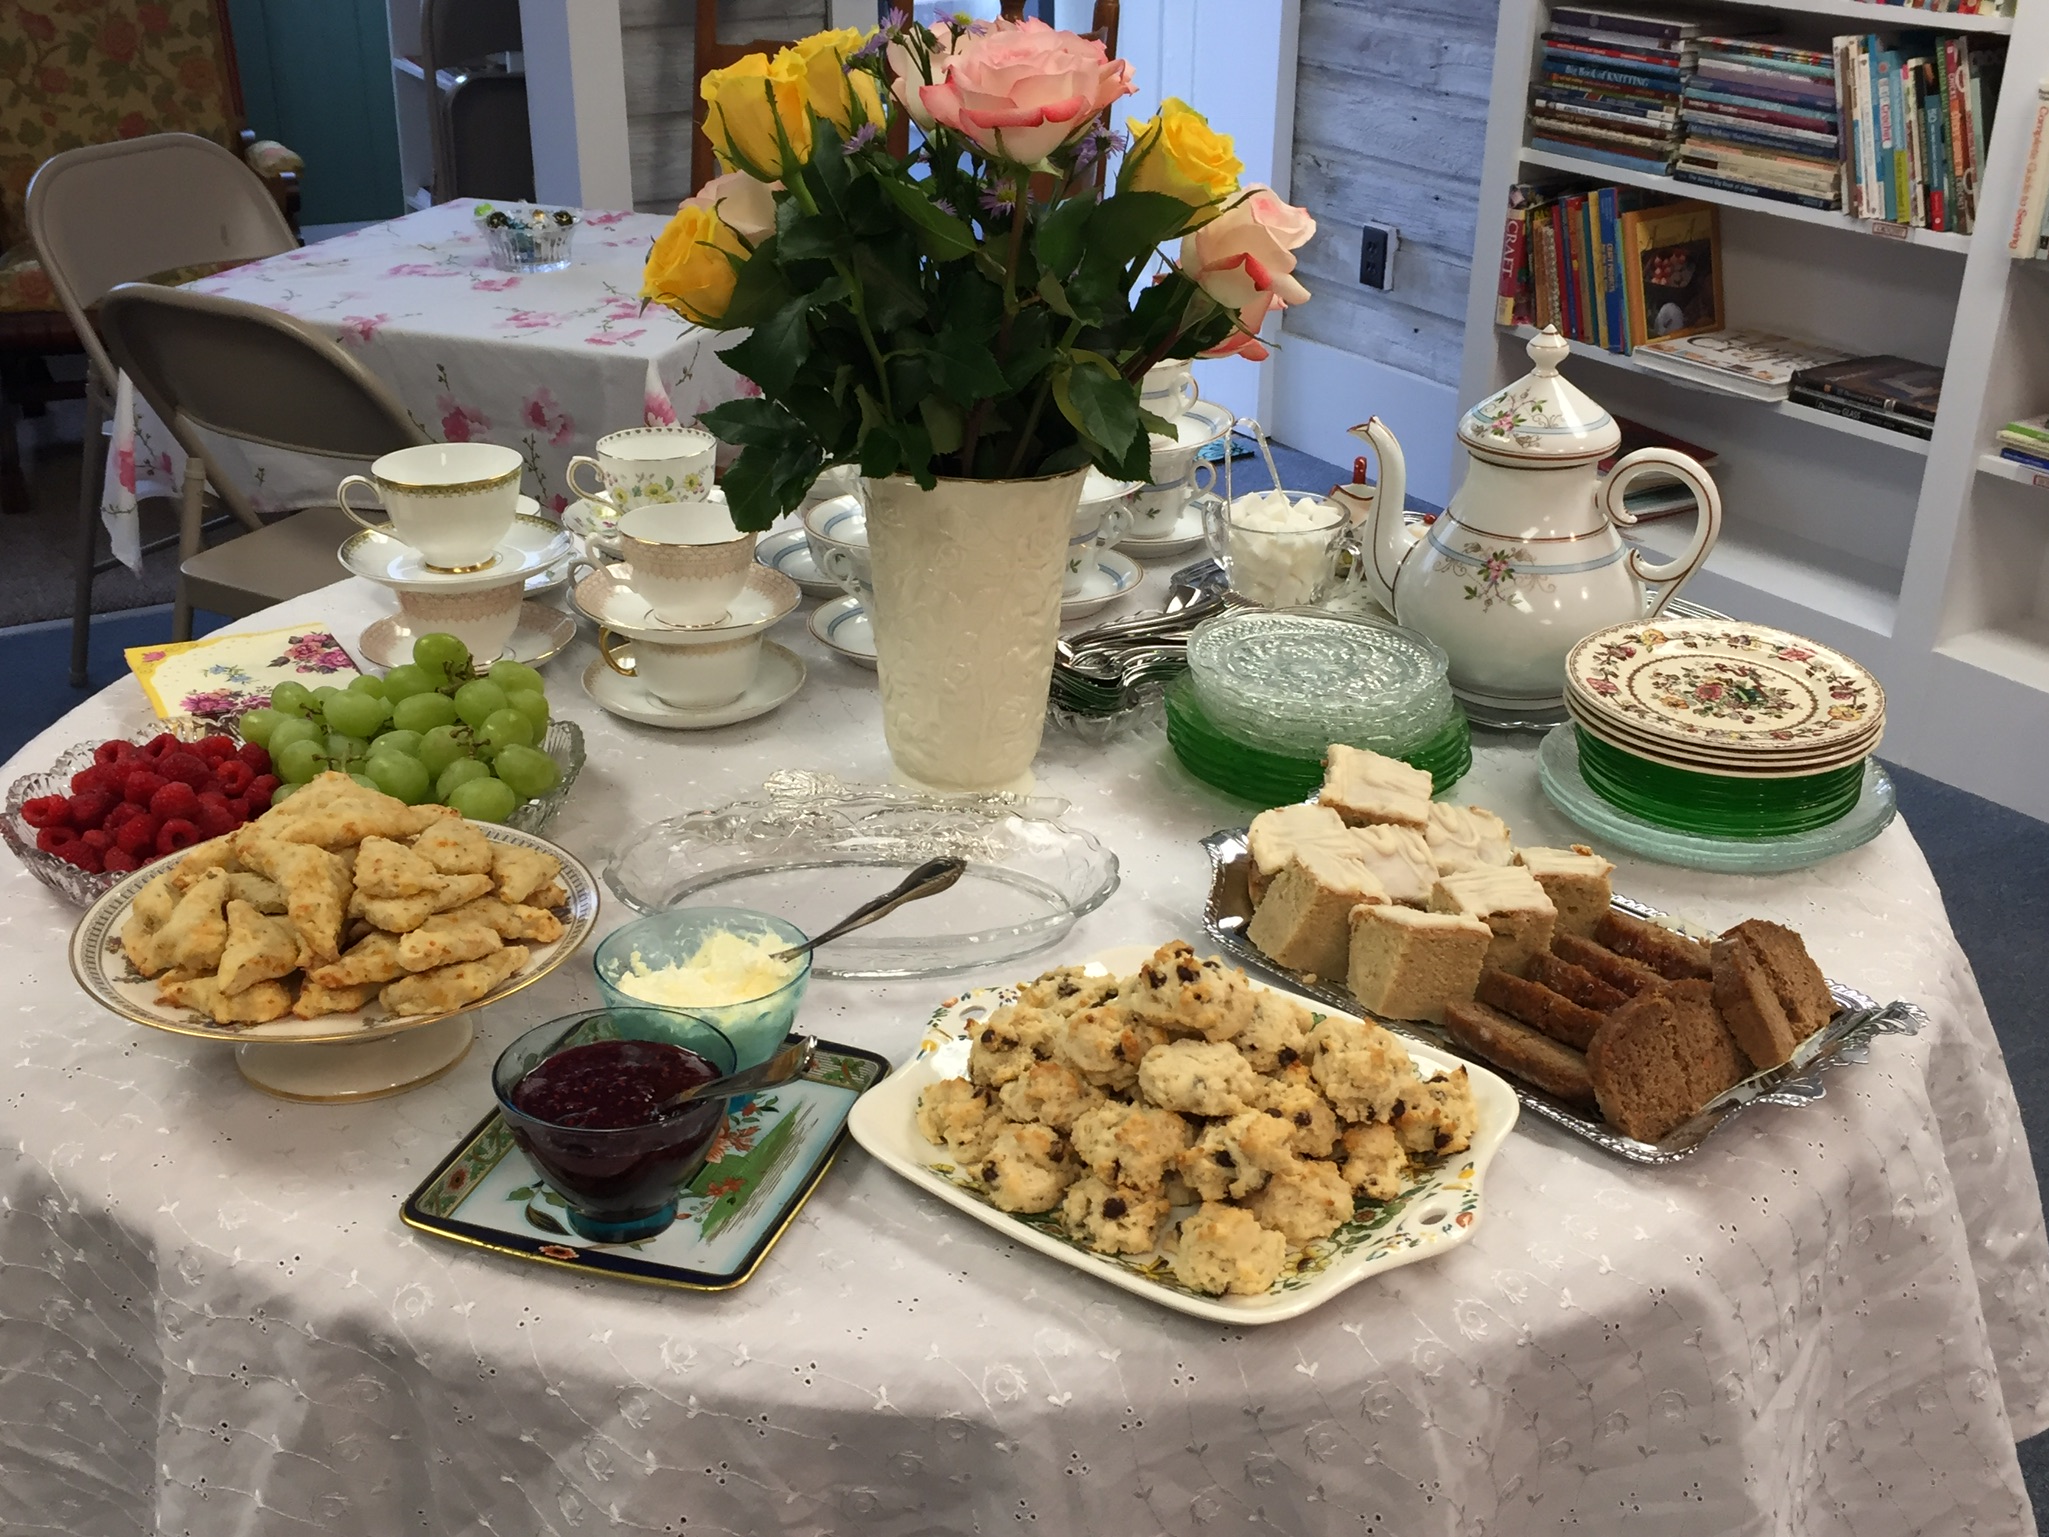 Tea and scones at our Victorian Tea Party.